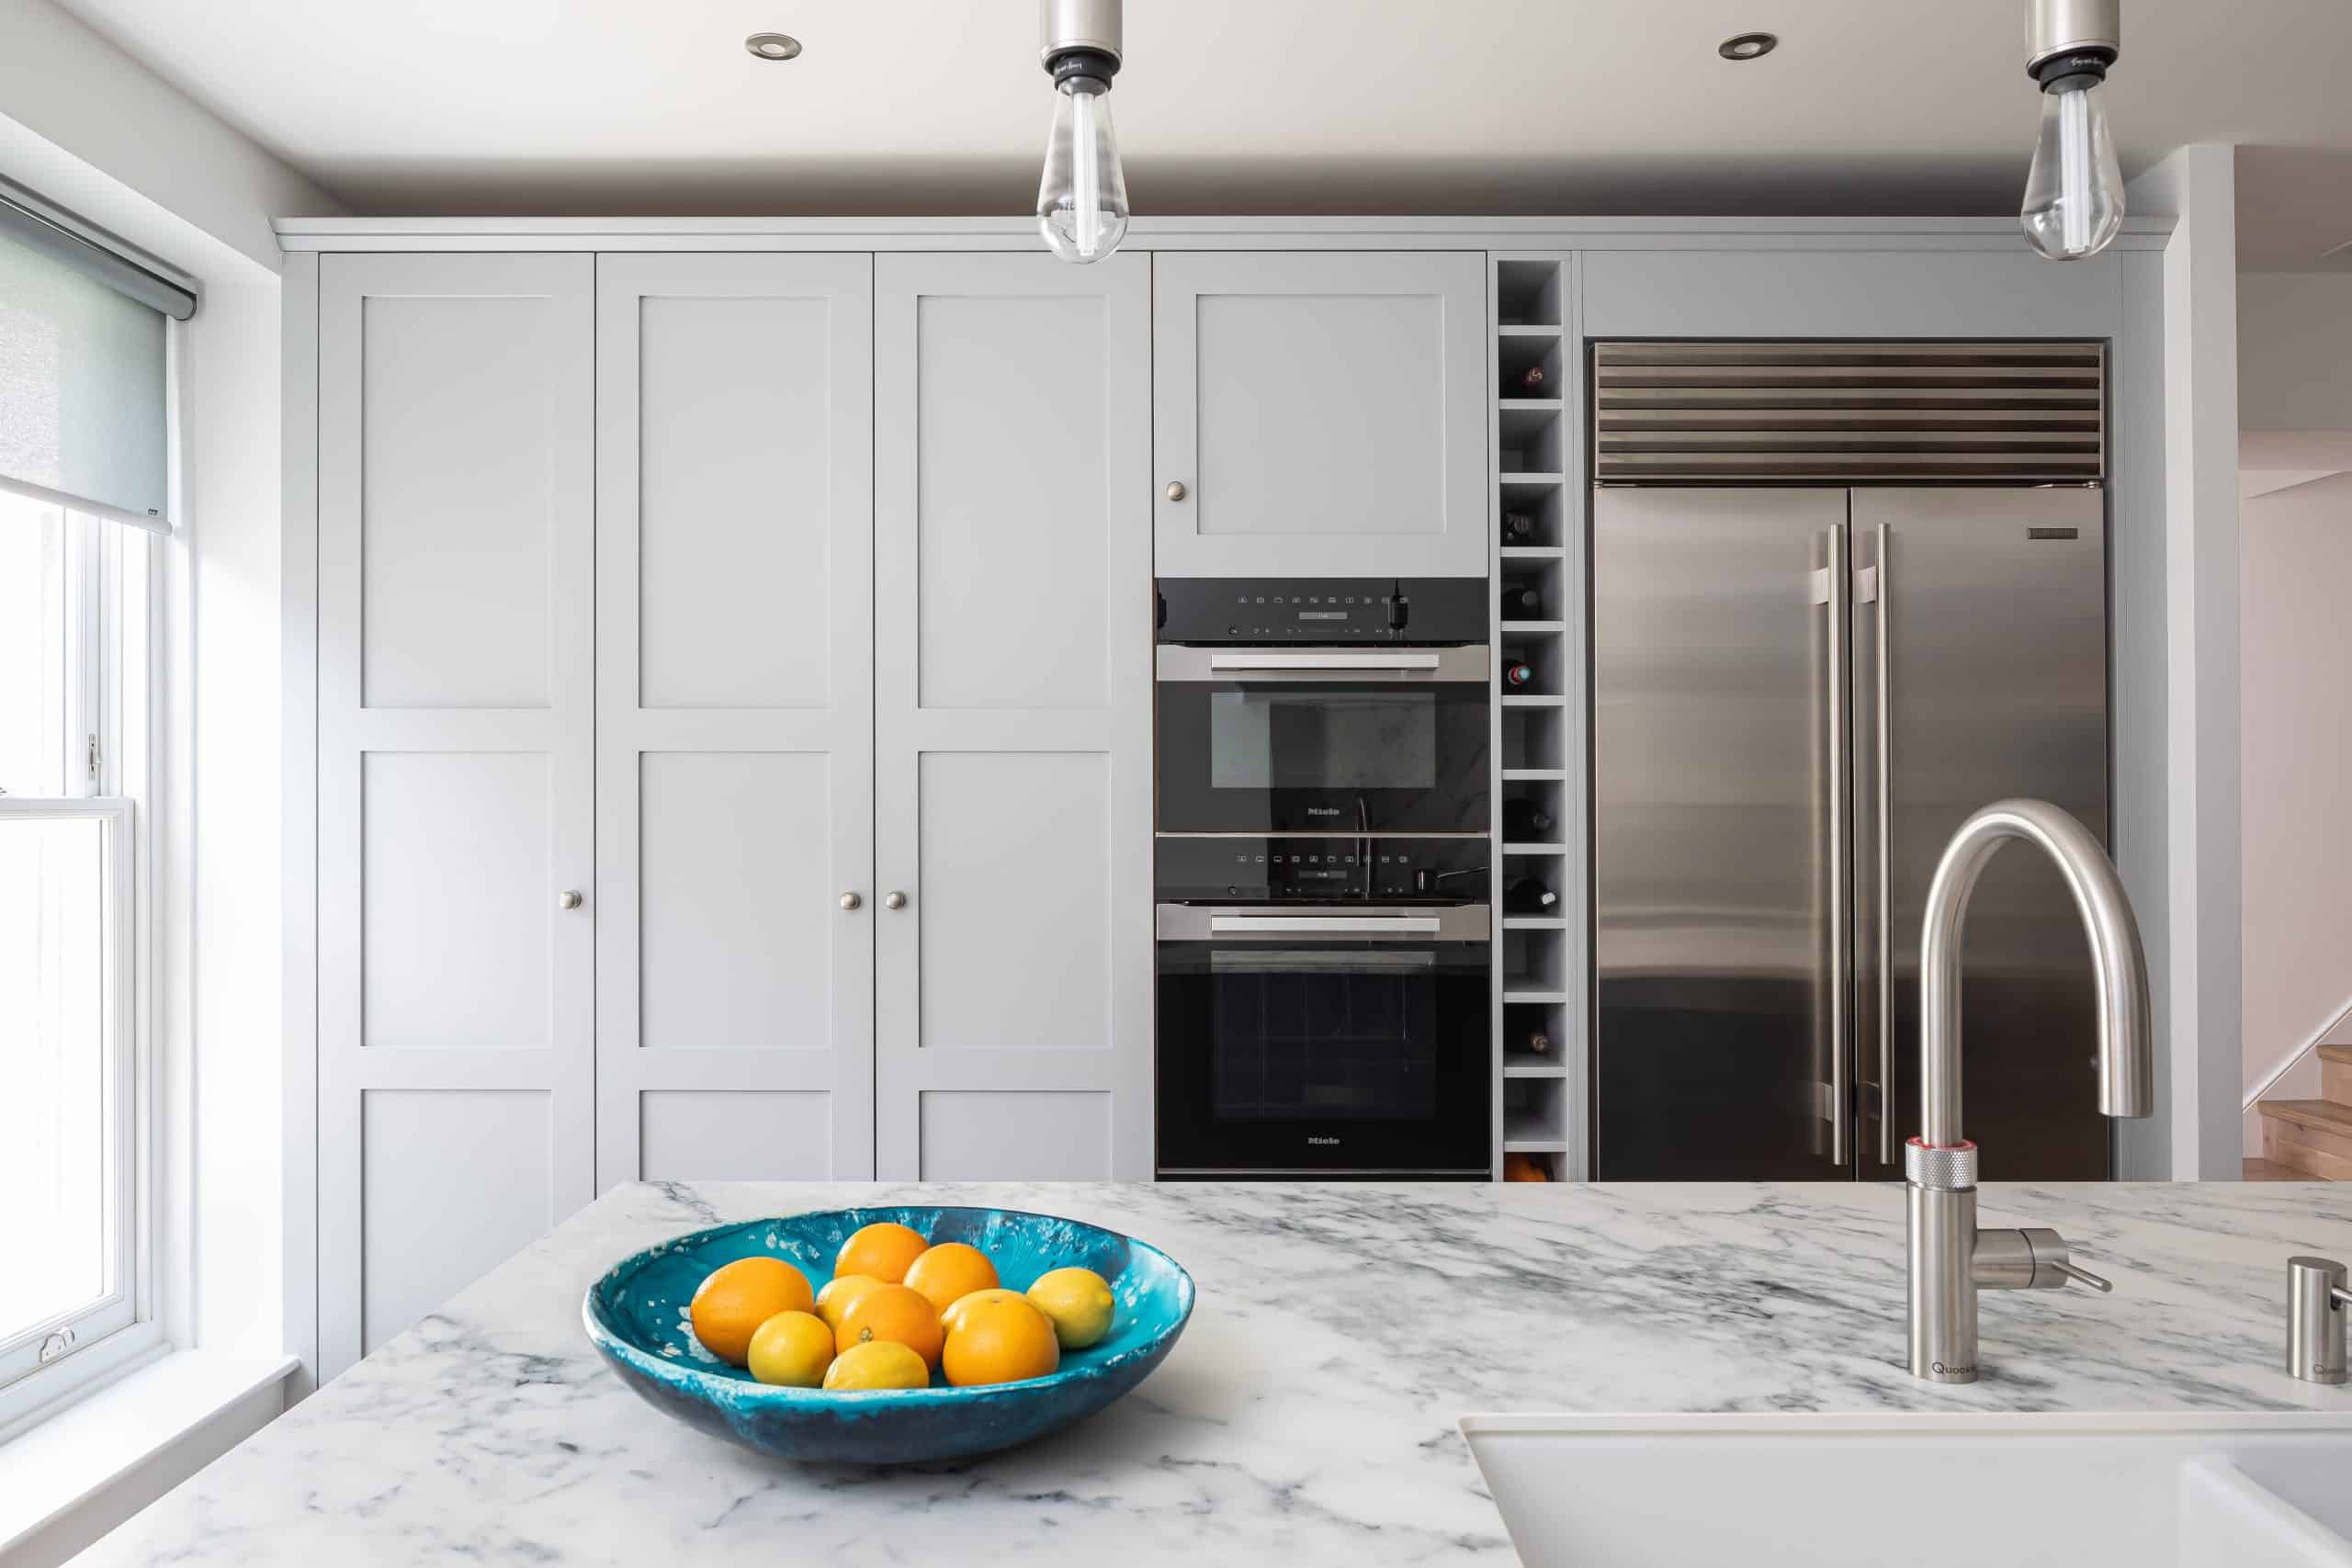 John Lewis of Hungerford bespoke luxury Shaker kitchen with grey cabinetry and marble worktops